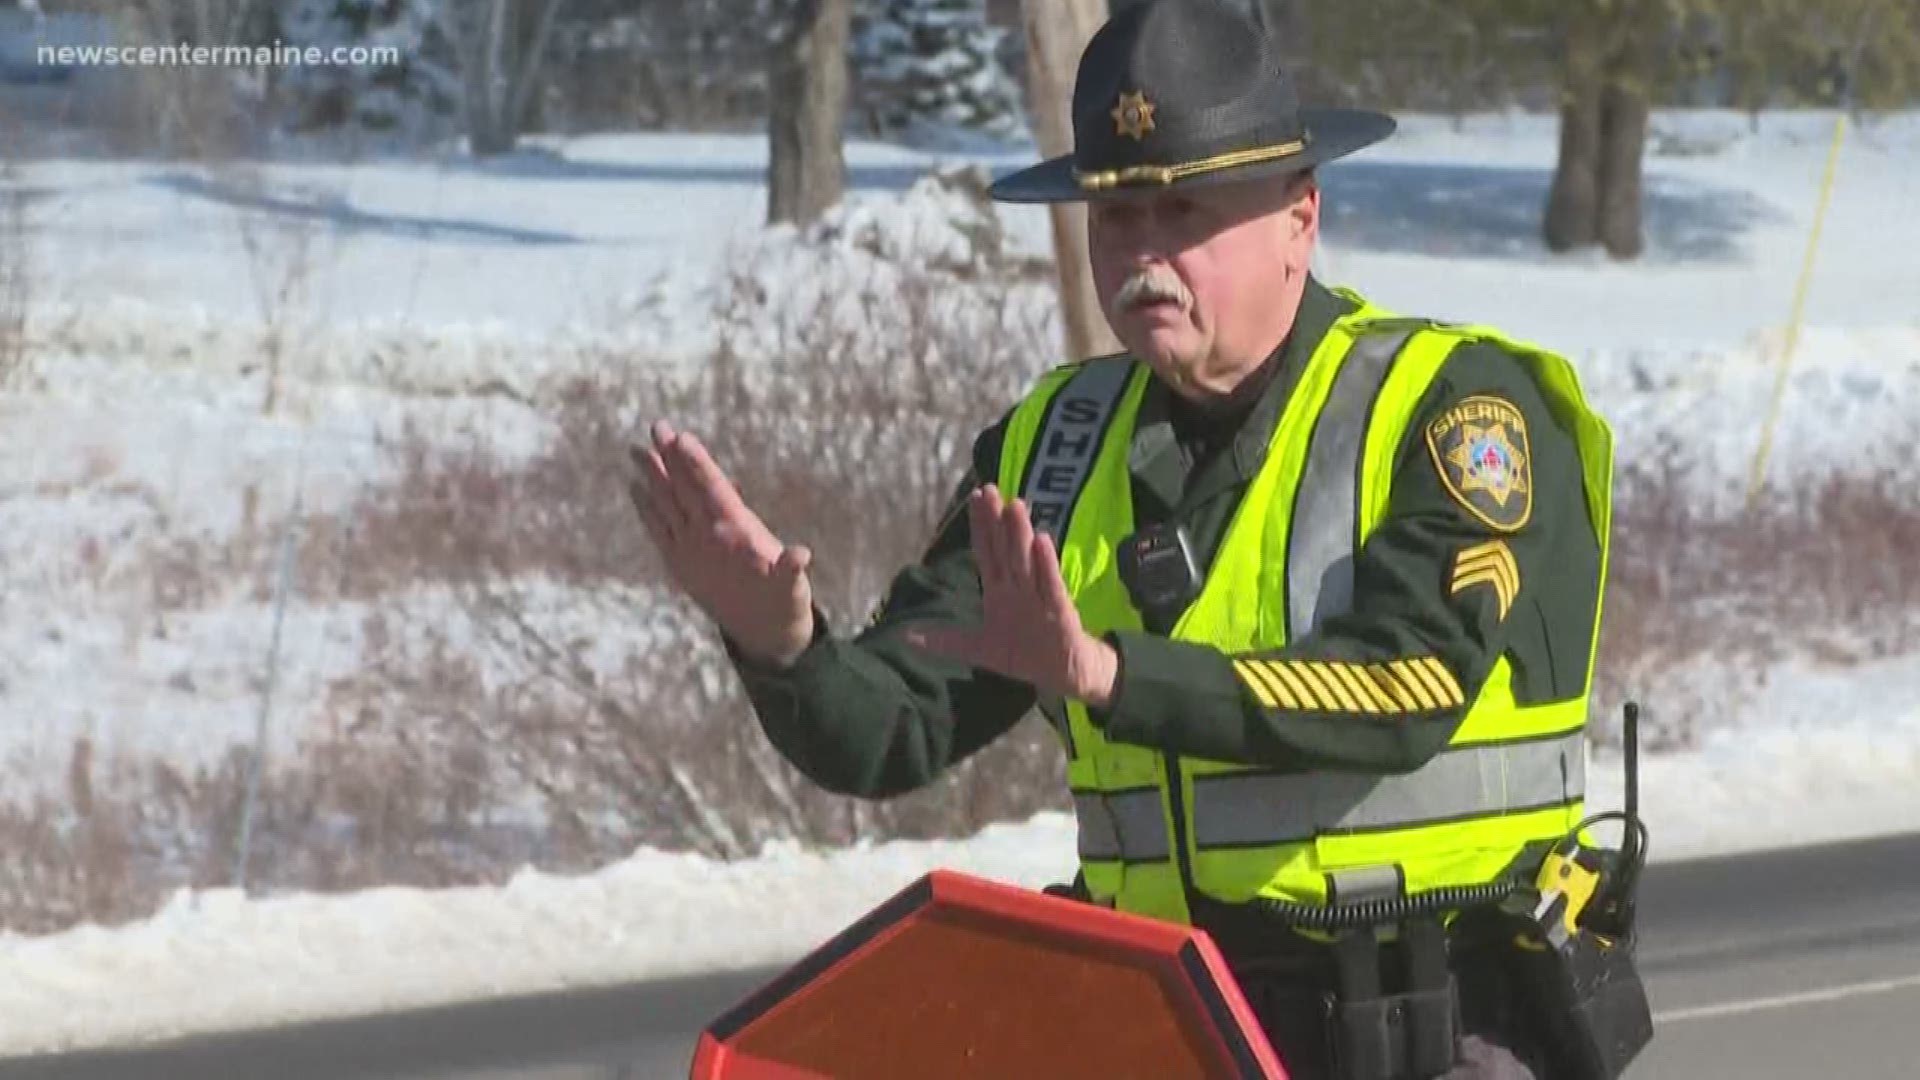 These are real dash cam videos from police officers -- put together as part of a social media campaign by Maine's Bureau of Highway Safety -- reminding drivers to follow the law... slow down or move over when you see flashing lights on the side of the road.